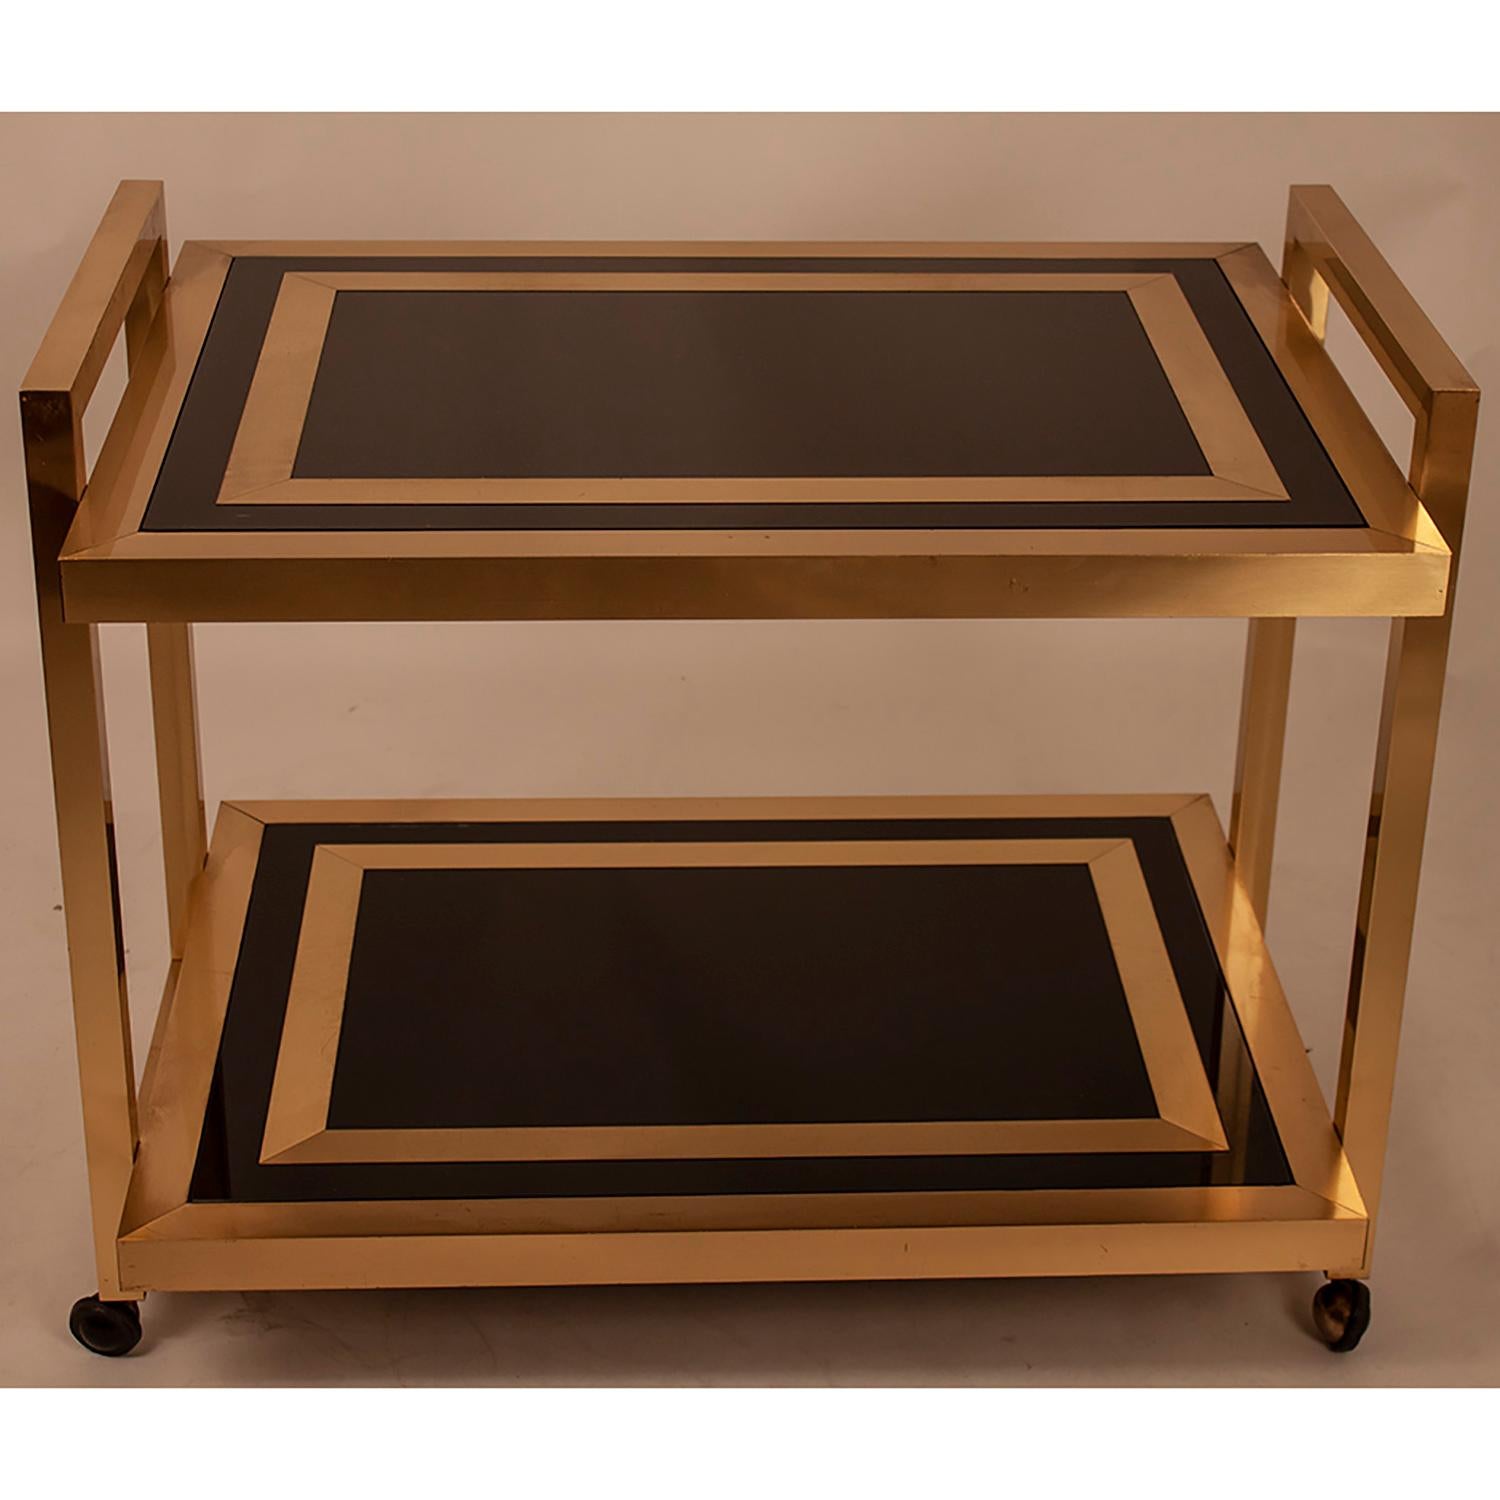 Bar cart, 1970s.
Glass bar trolley in black glass and gold brass. Origin Spanish.
Good quality. Both can be used as a cart or to serve drinks, also as a side table, next to a sofa, is inspired by Willy Rizzo. The contrast of black with gold brass.